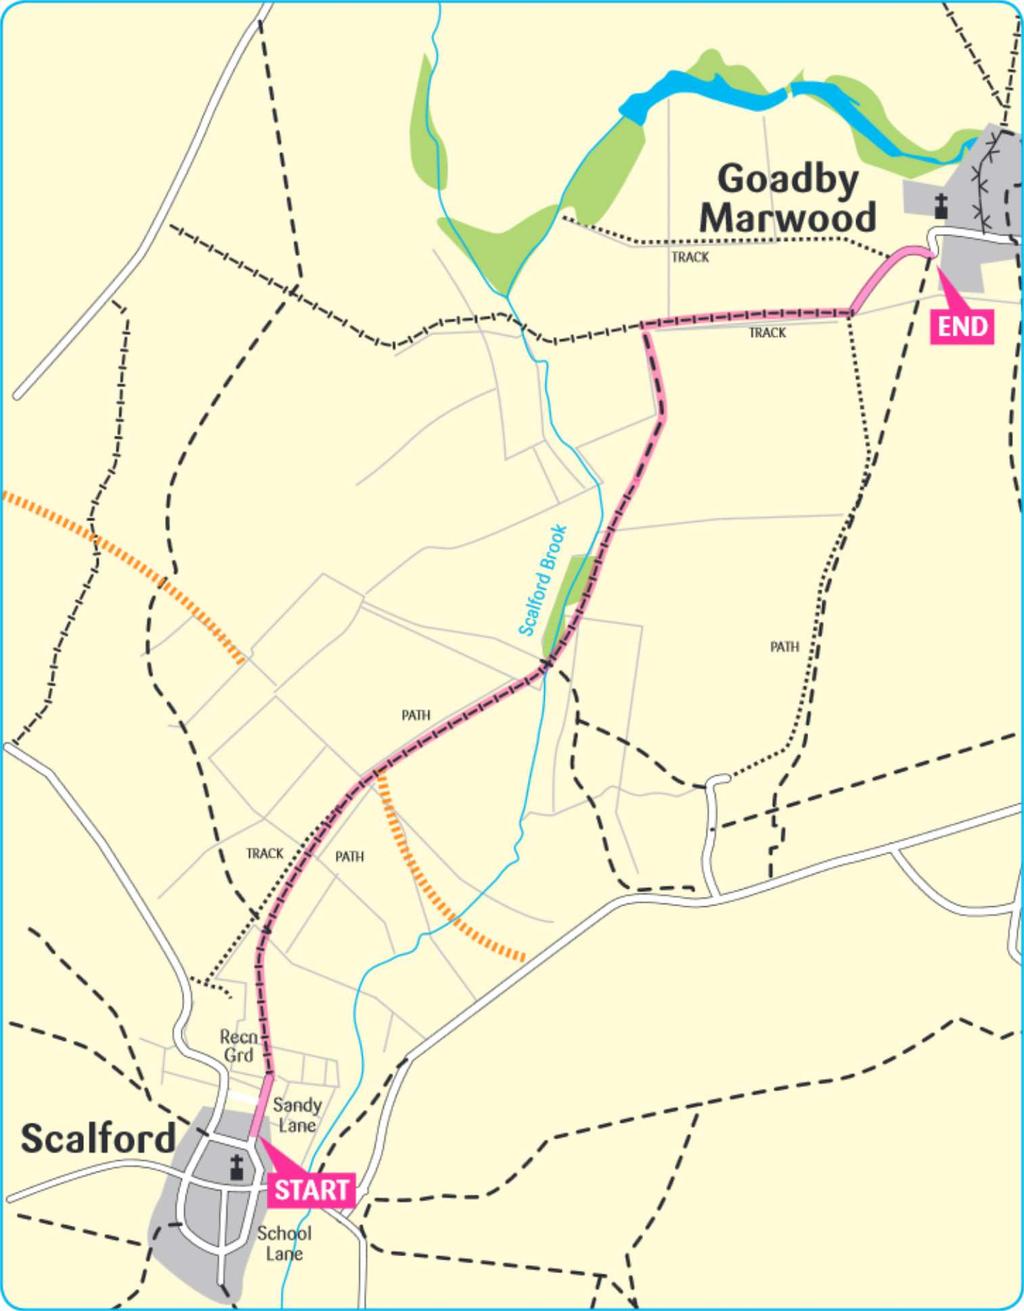 Scalford to Goadby Marwood (1½ miles/